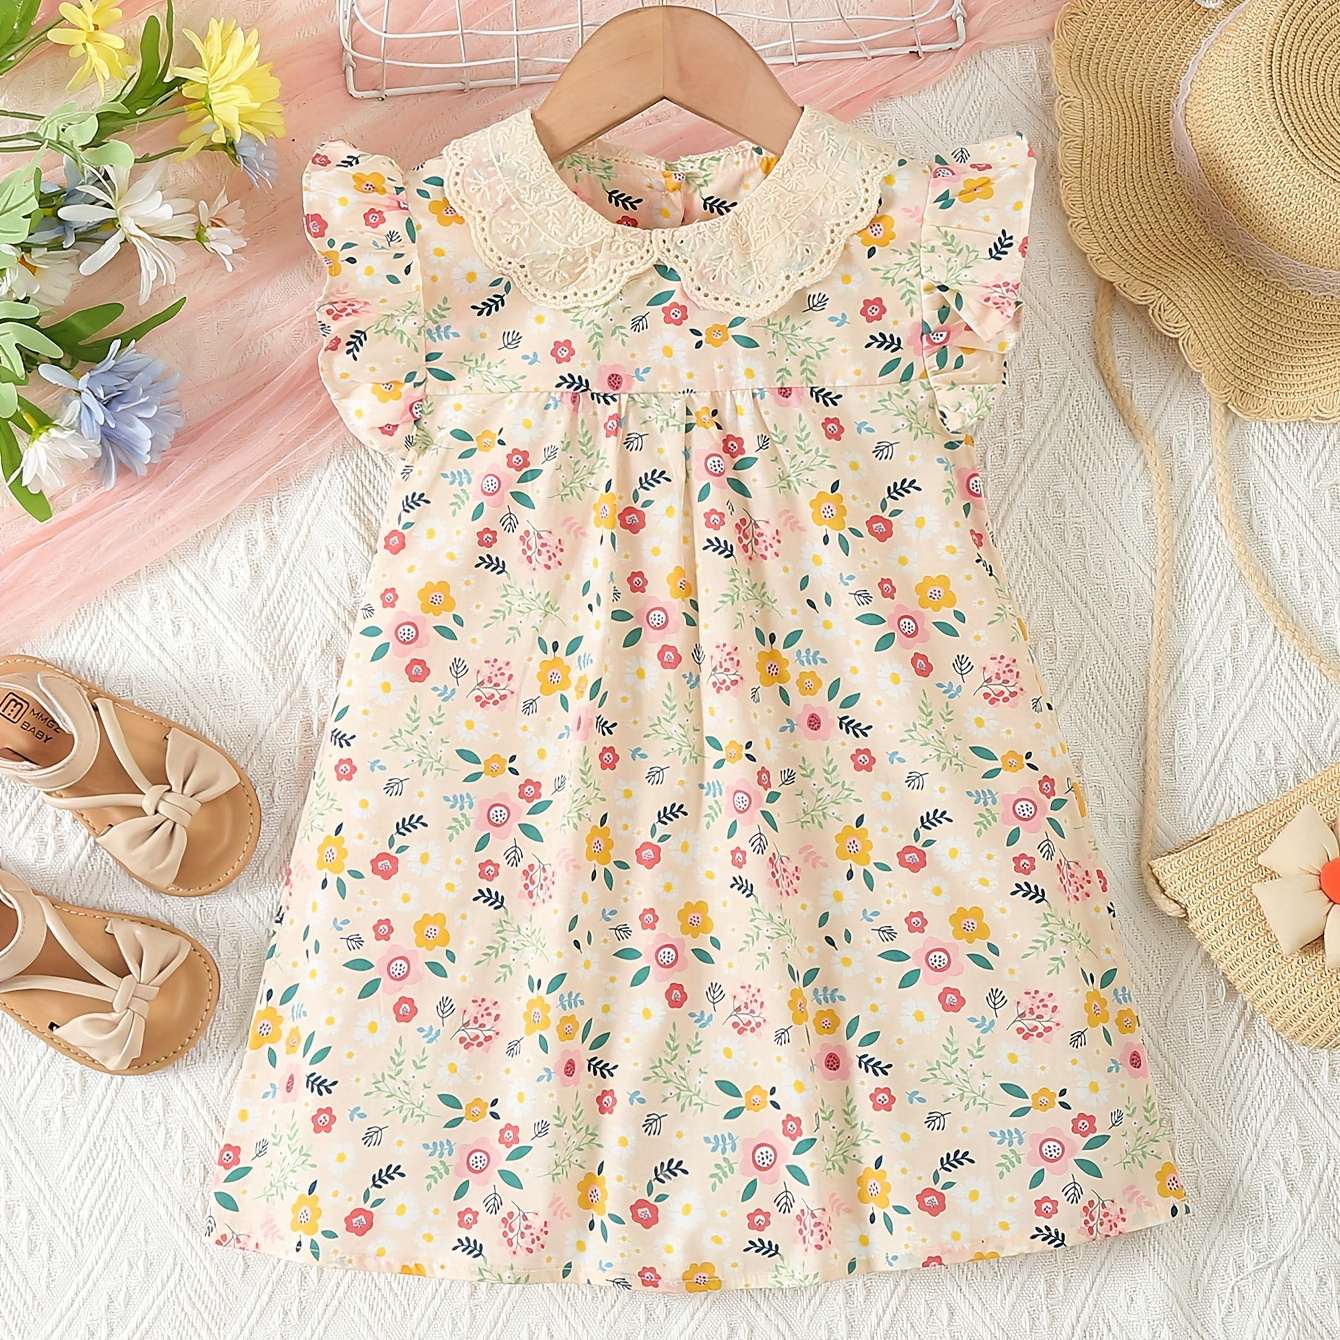 

Baby's Pastoral Style Floral Pattern Dress, Lace Collar Cap Sleeve Cotton Dress, Infant & Toddler Girl's Clothing For Summer/spring